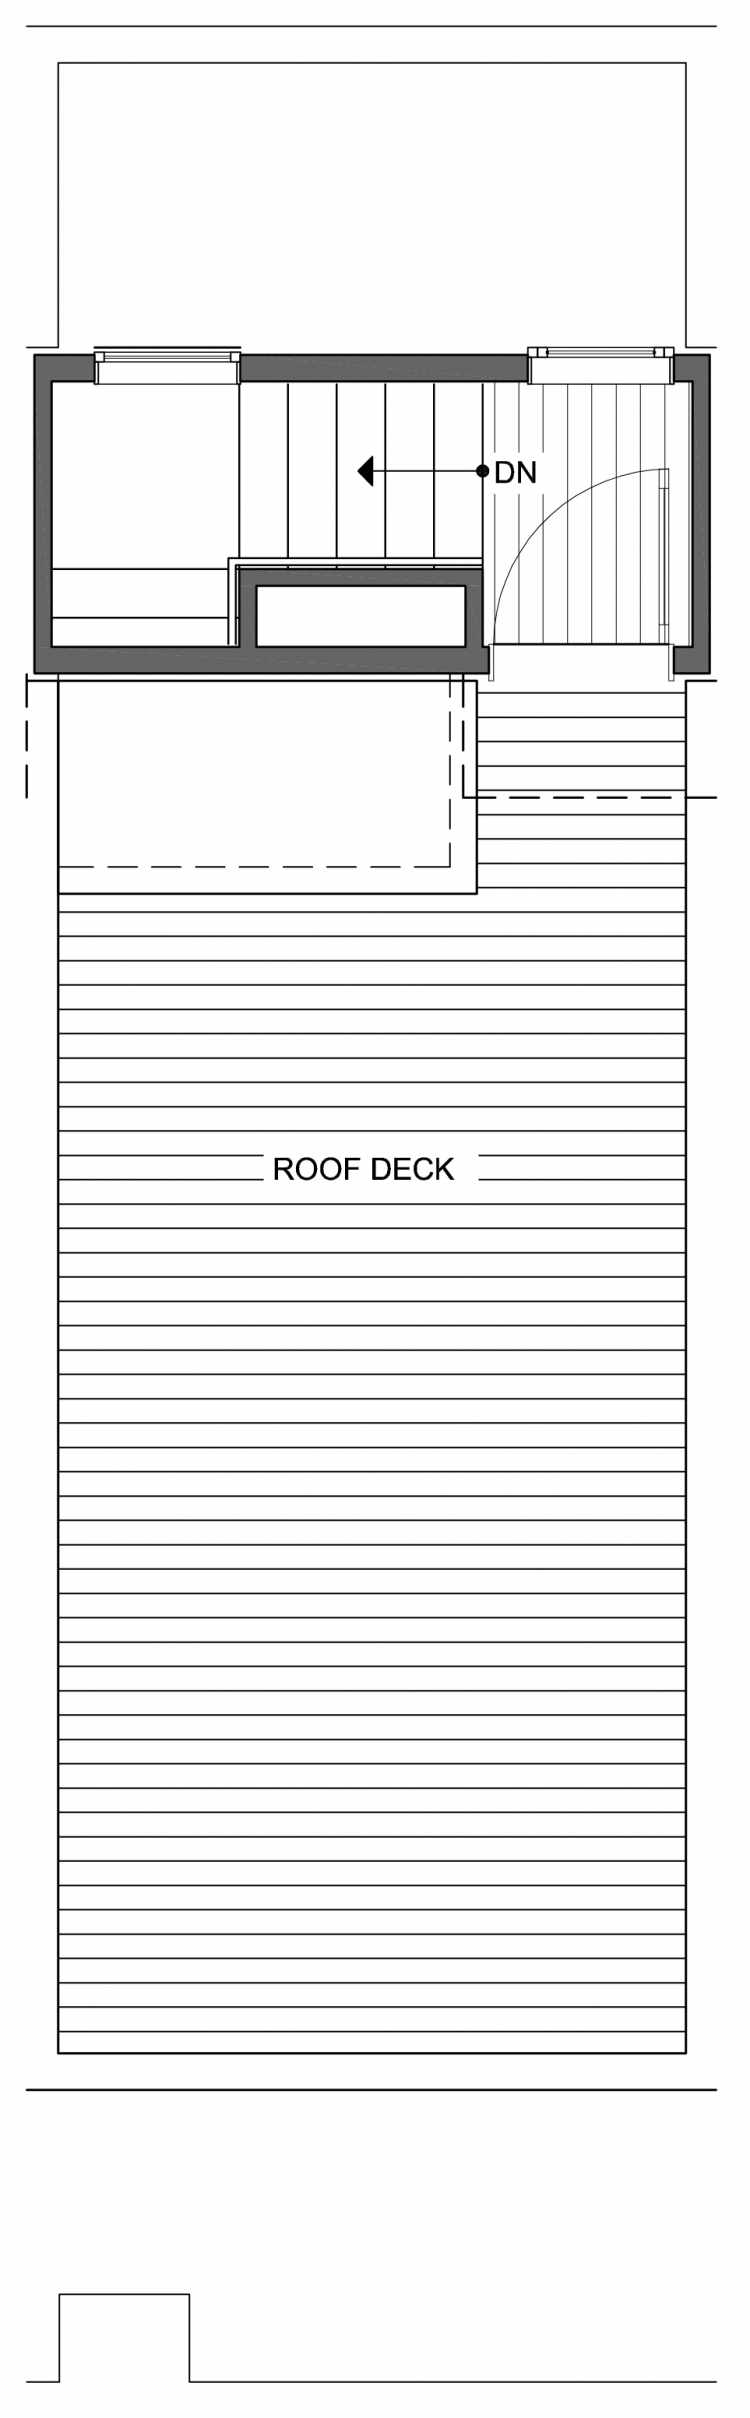 Roof Deck Floor Plan of 806E N 46th St, One of the Nino 15 East Townhomes by Isola Homes